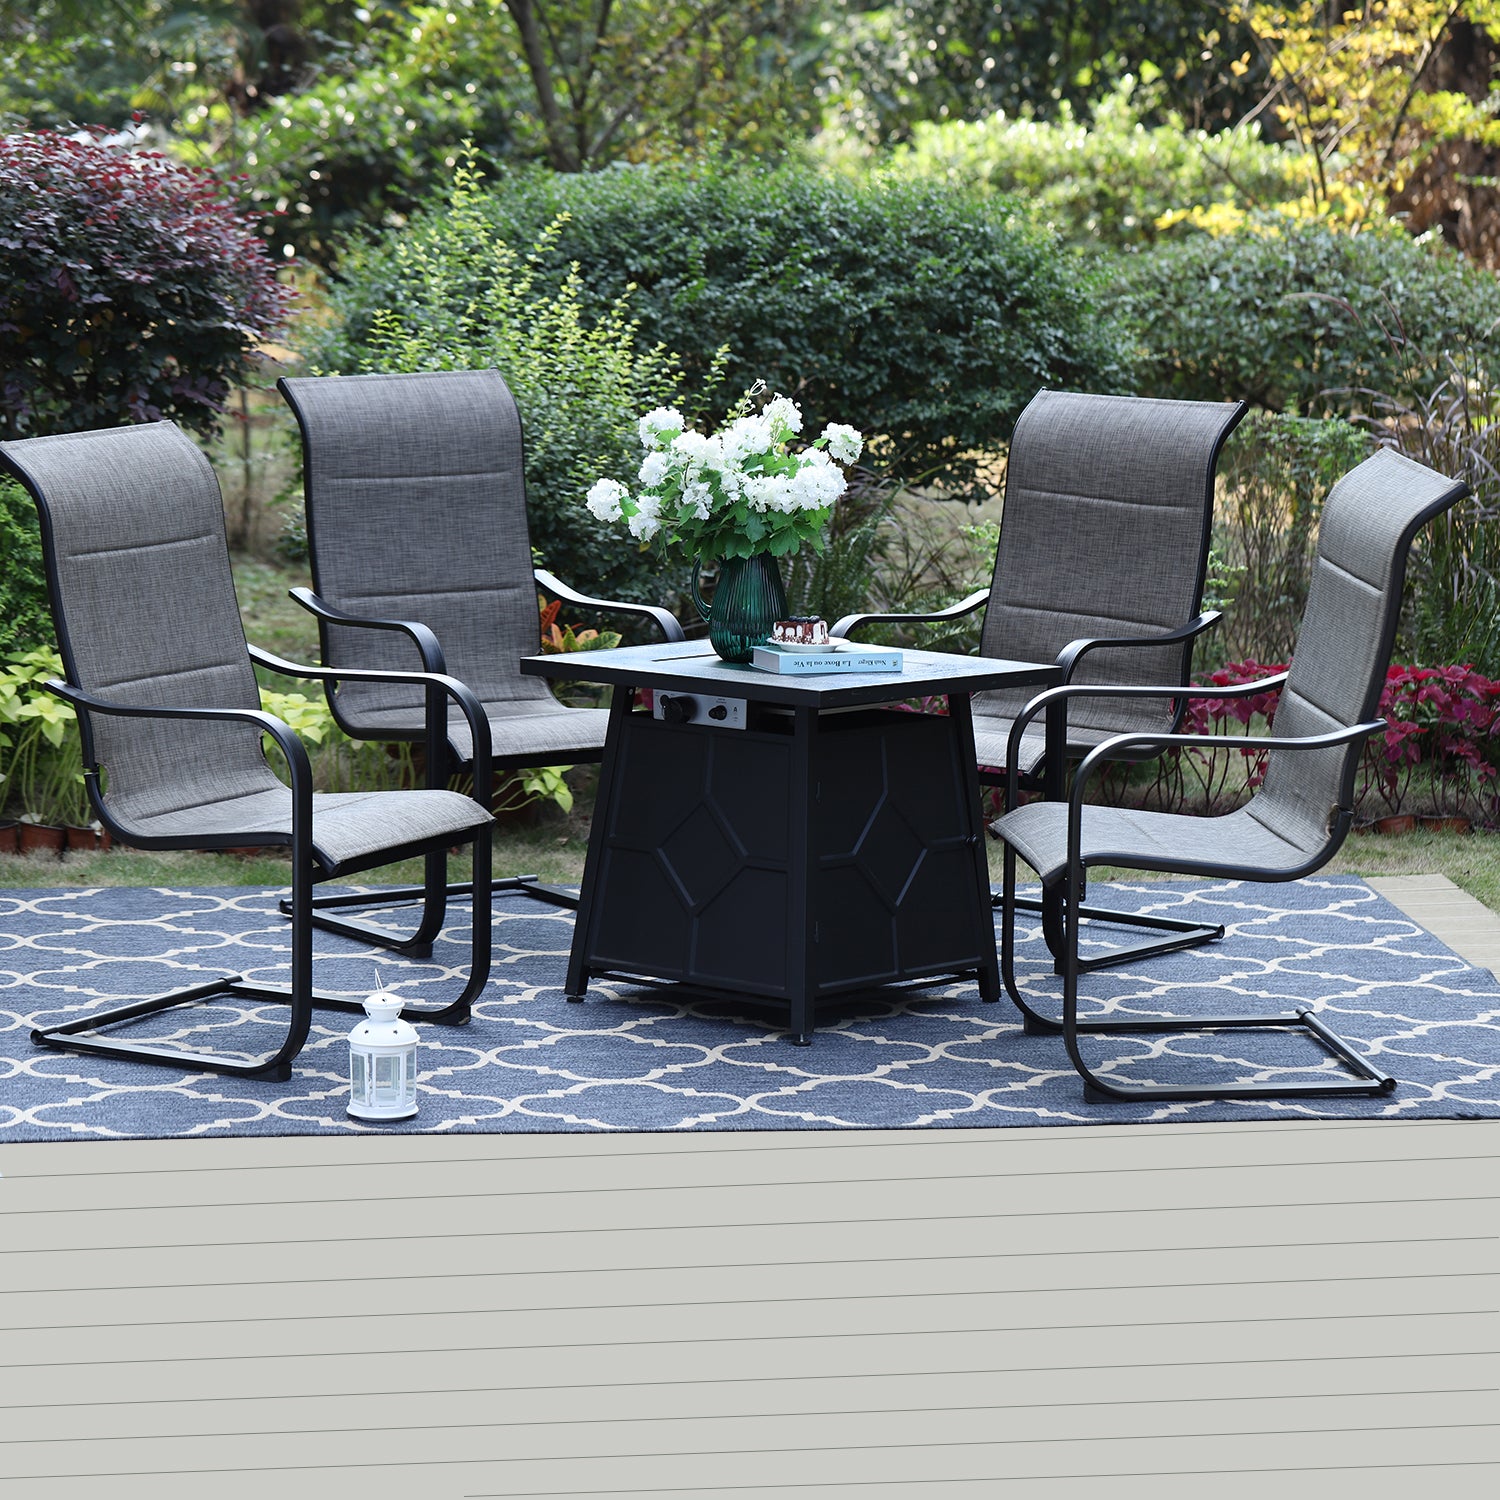 MFSTUDIO 5-Piece Gas Fire Pit Table Set 28" TerraFab Table & 4 Padded Textilene C-spring Chairs